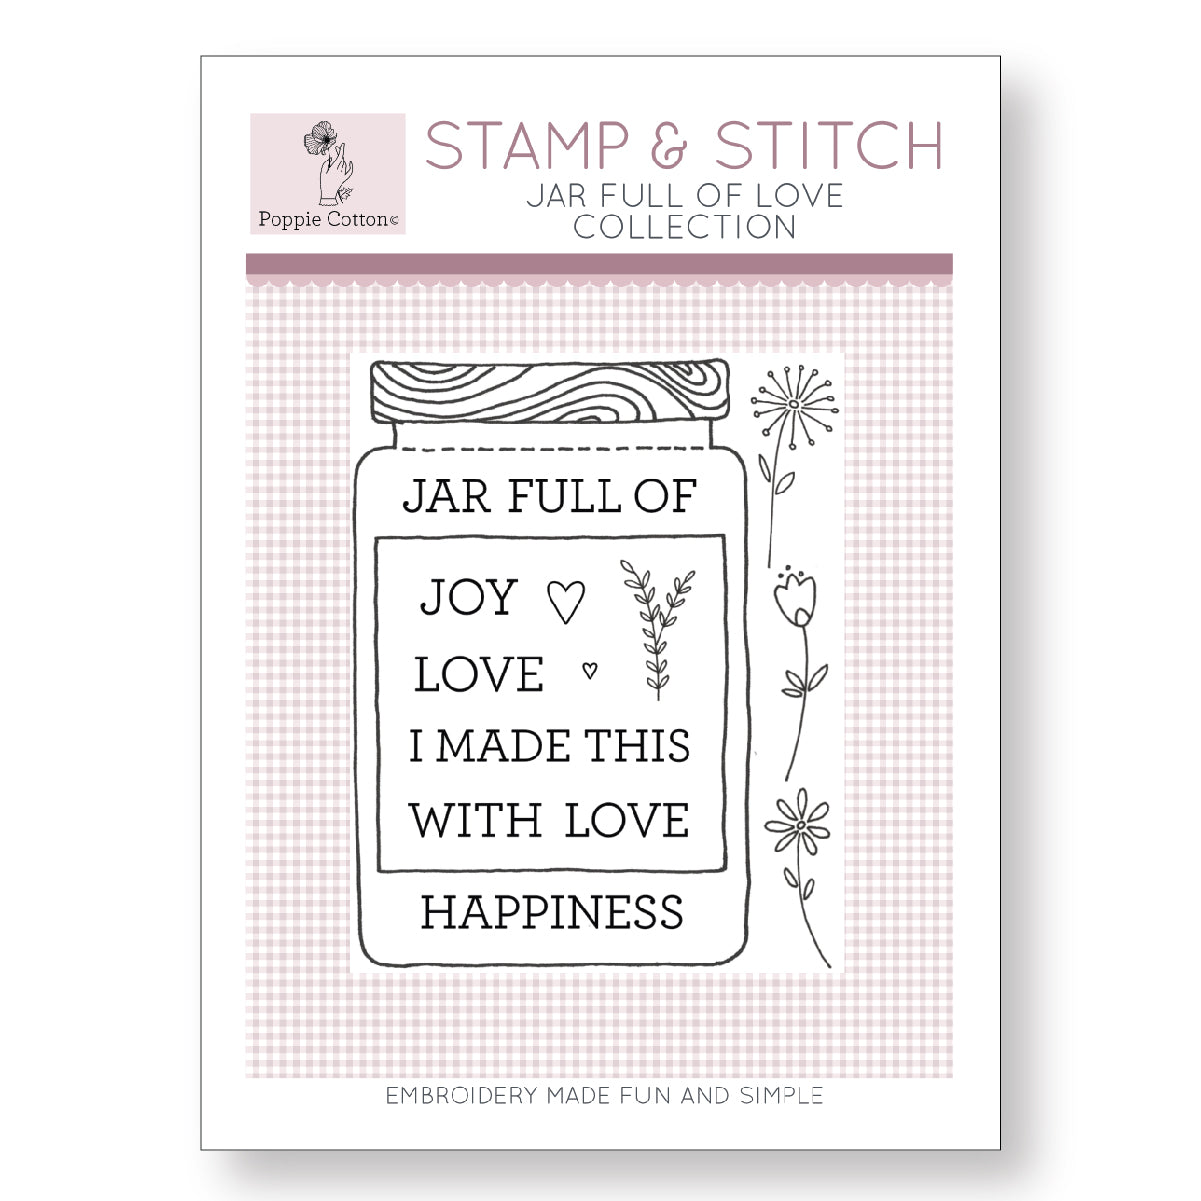 Stamp and Stitch Jar Full of Love Label by Poppie Cotton